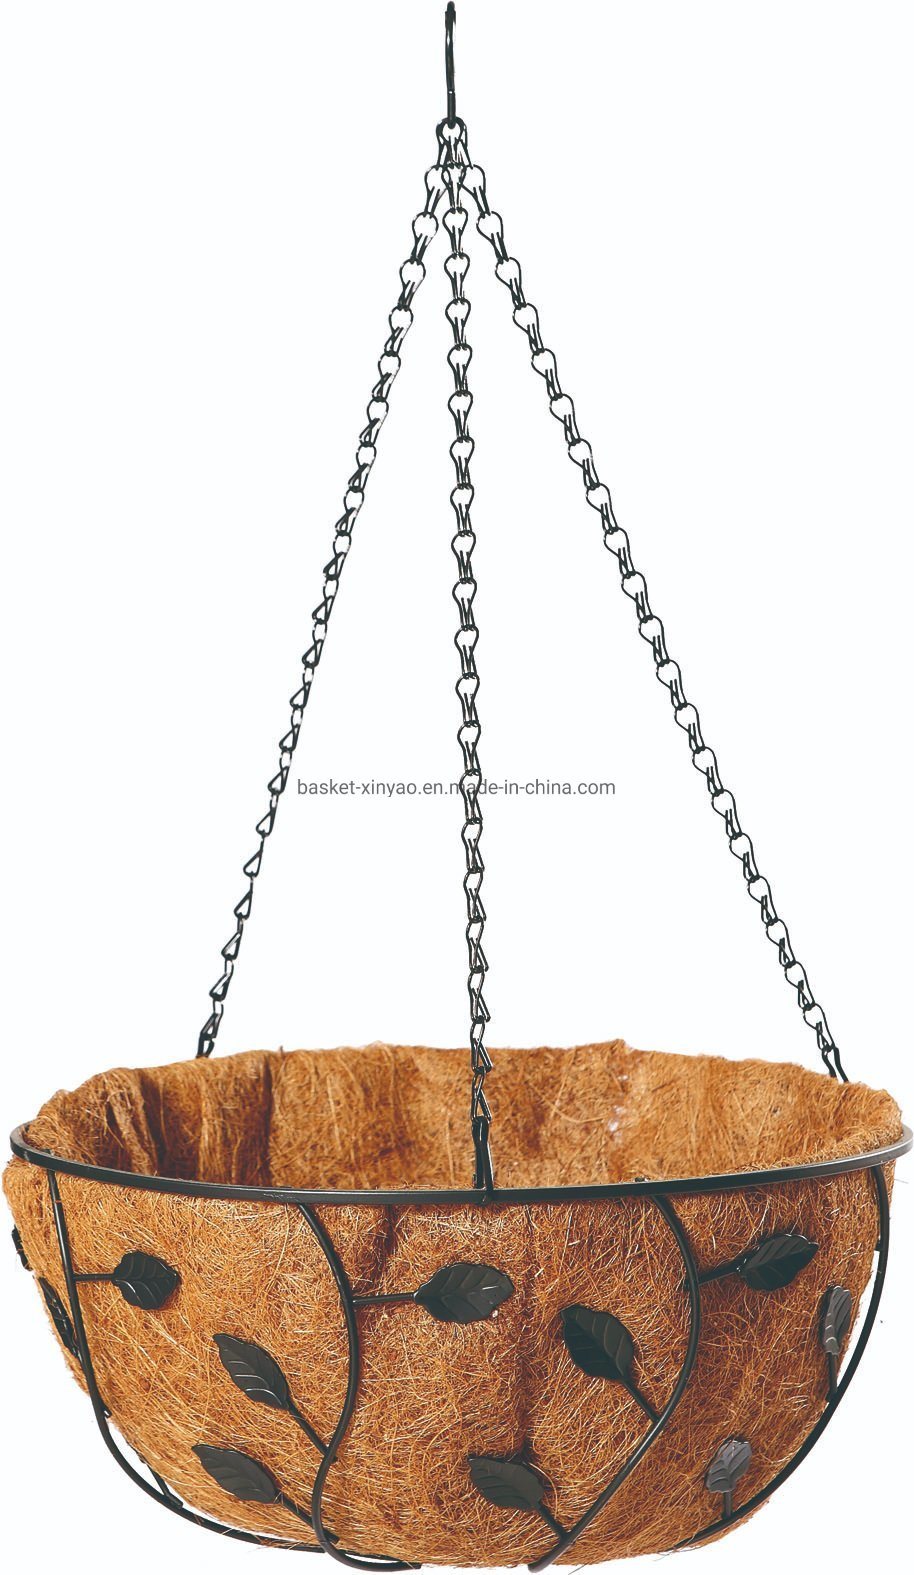 Garden Metal Hanging Basket with Leaves Decoration (Bh090008)